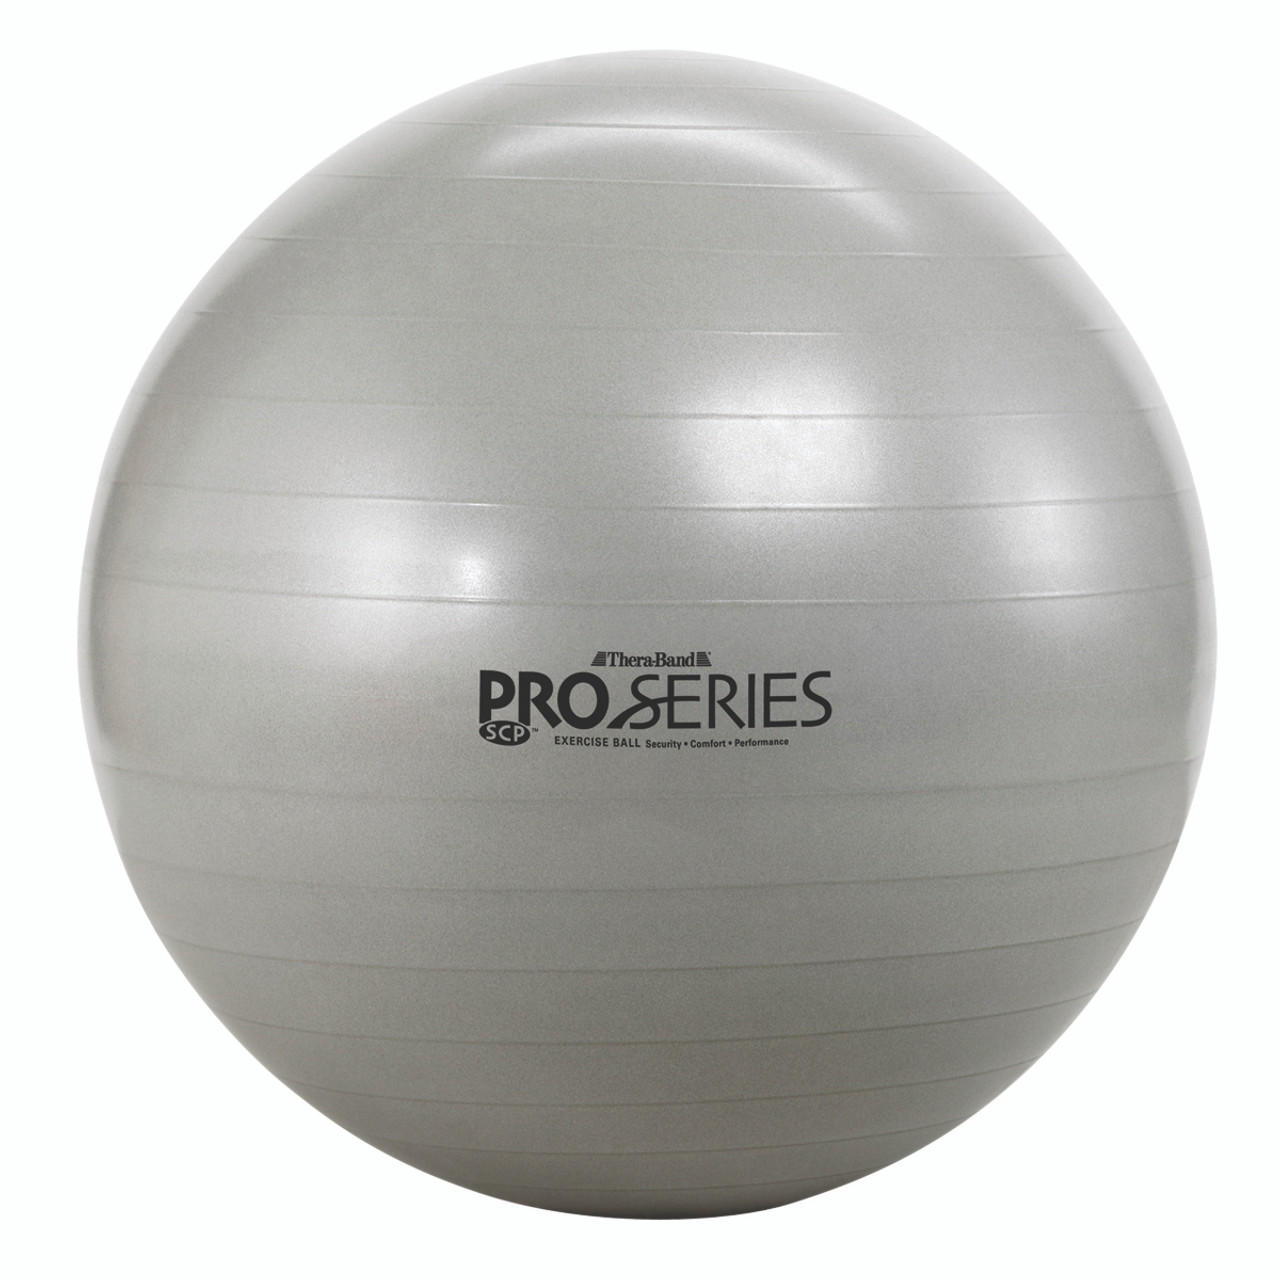 TheraBand¨ Inflatable Exercise Ball - Pro Series SCPª - Silver - 34" (85 cm)